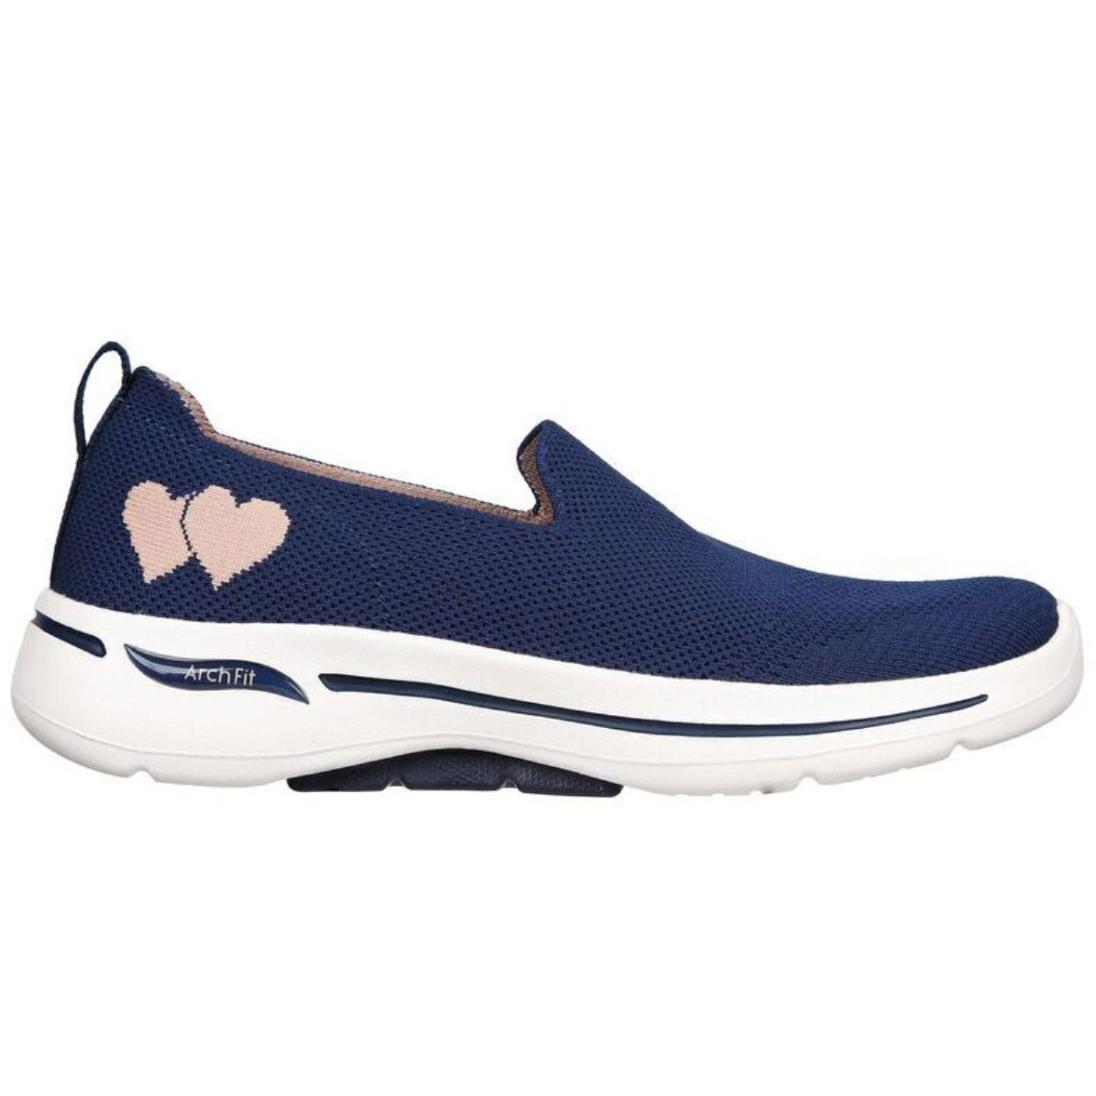 Woman Skechers GO Walk Arch Fit Lovely Heart Slip-on Color Navy 124854 - Navy